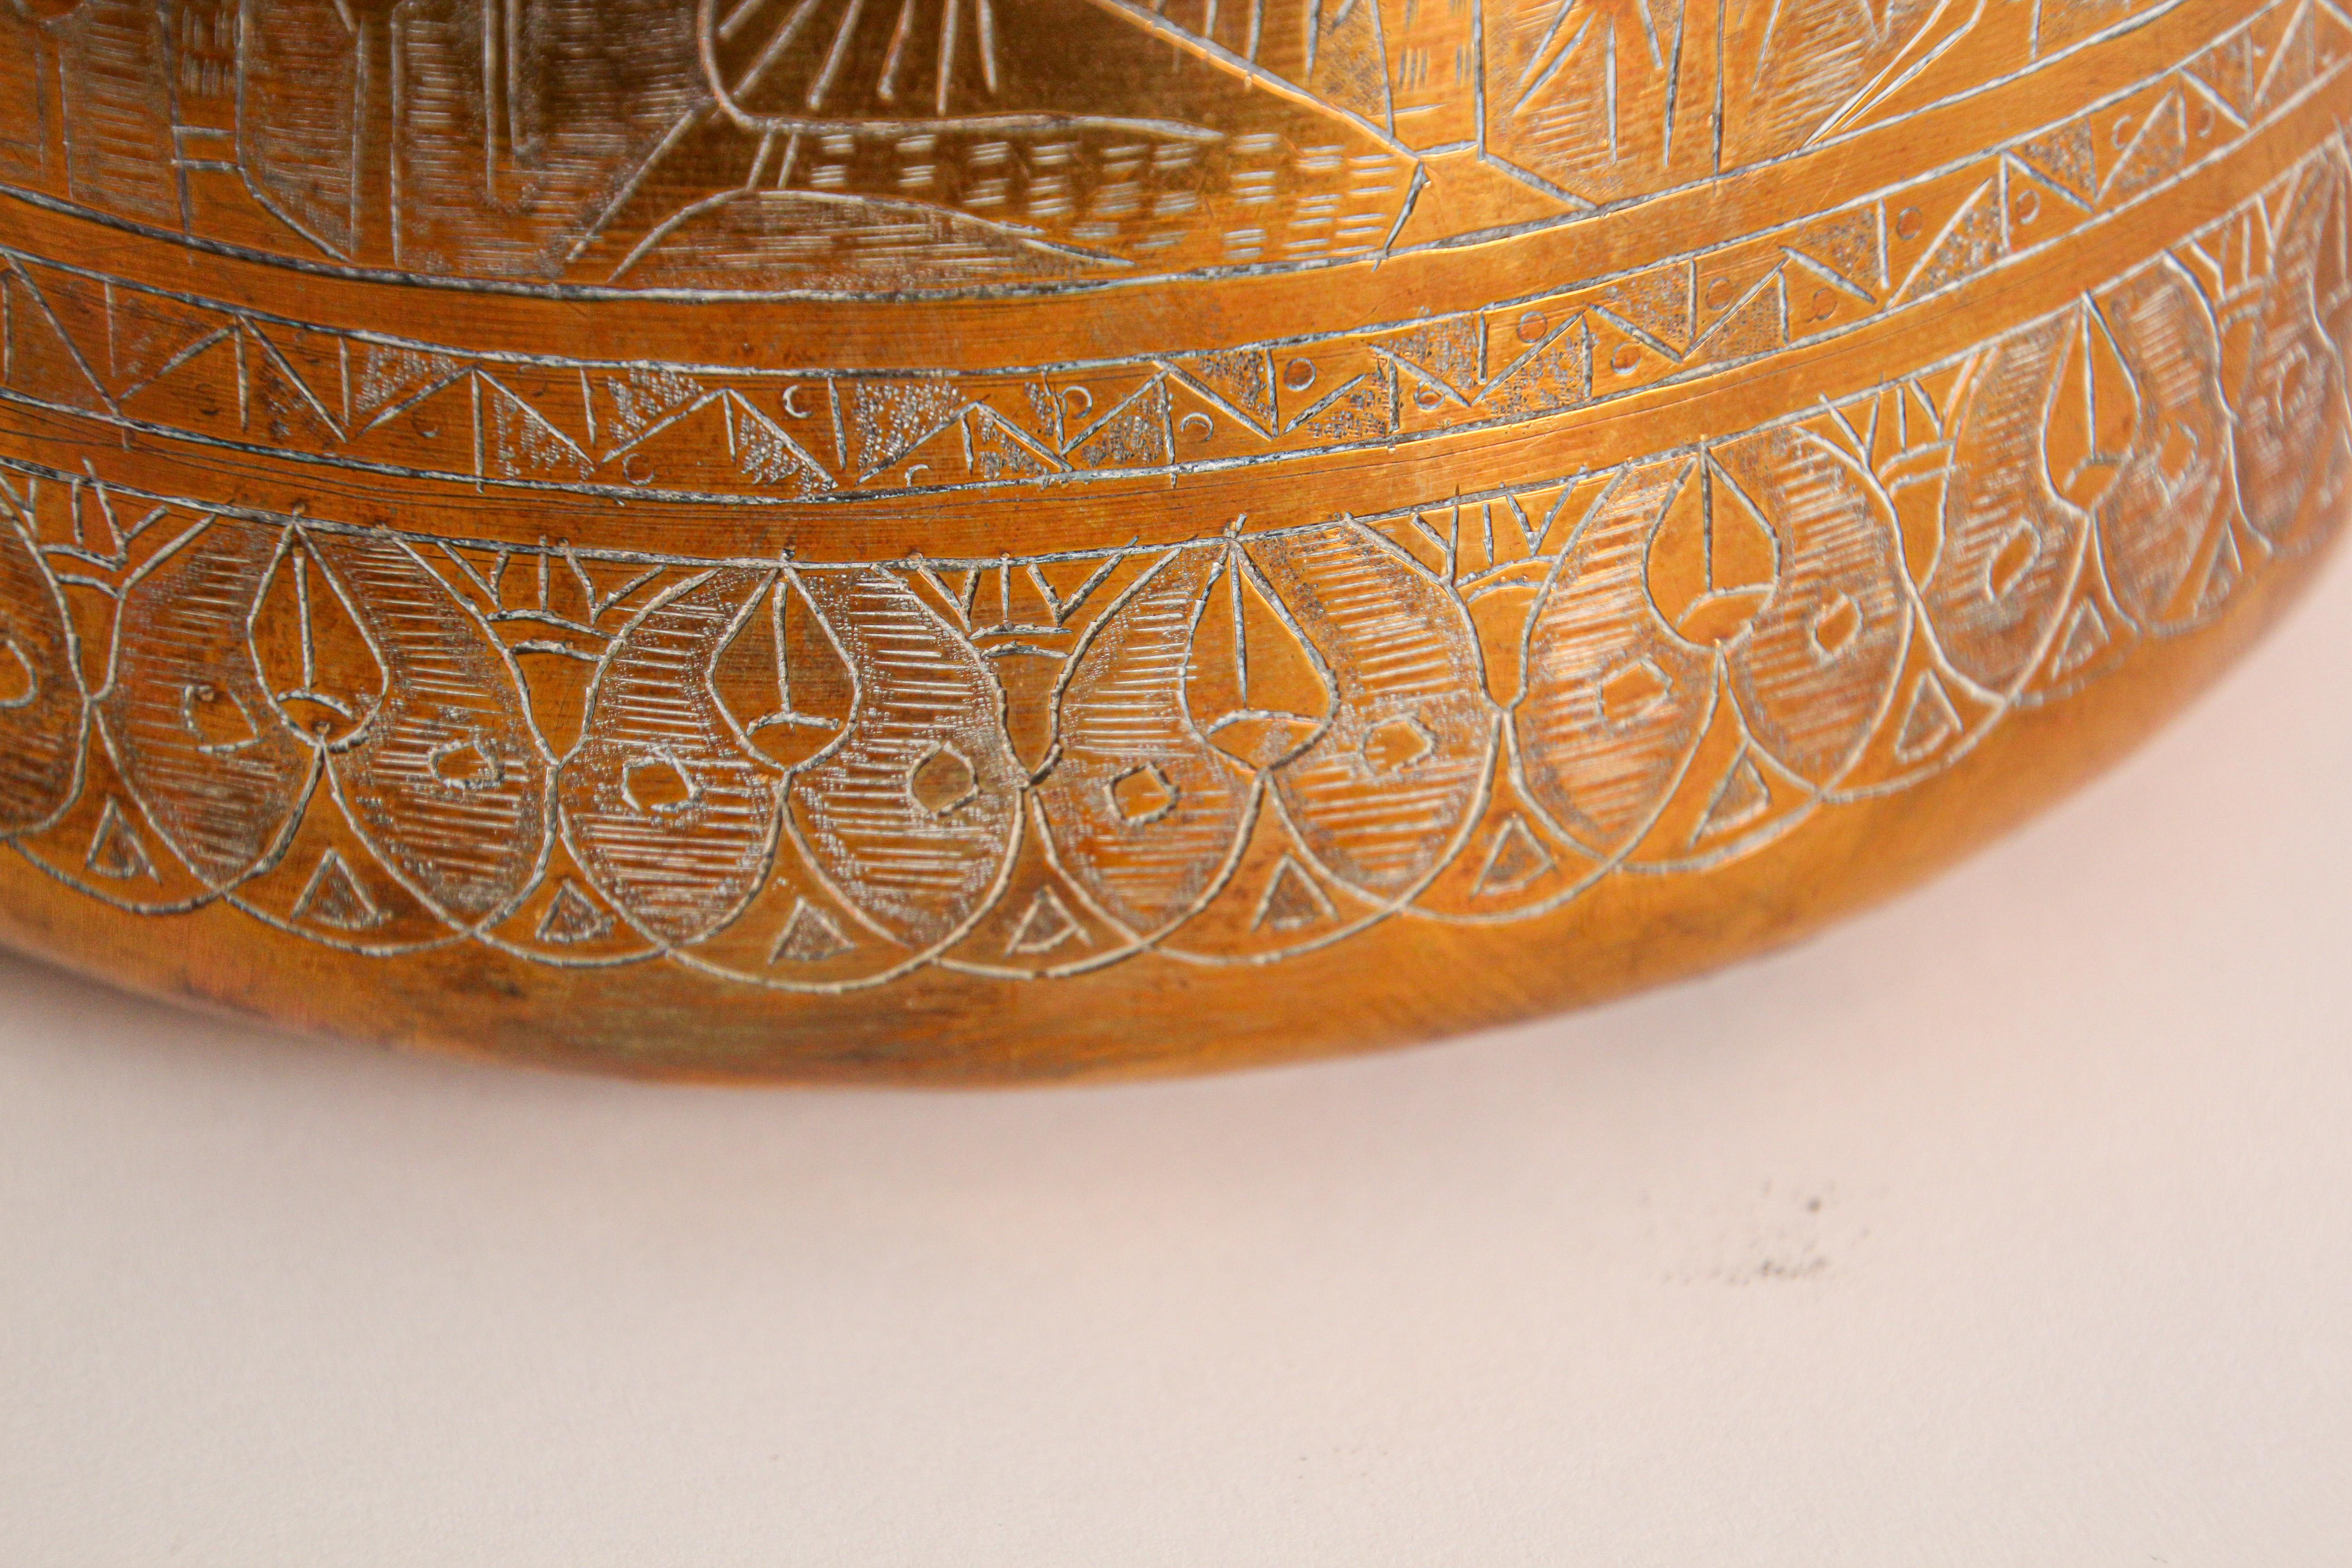 Hand Etched Egyptian Brass Vessel Jardiniere, 19th Century In Good Condition For Sale In North Hollywood, CA